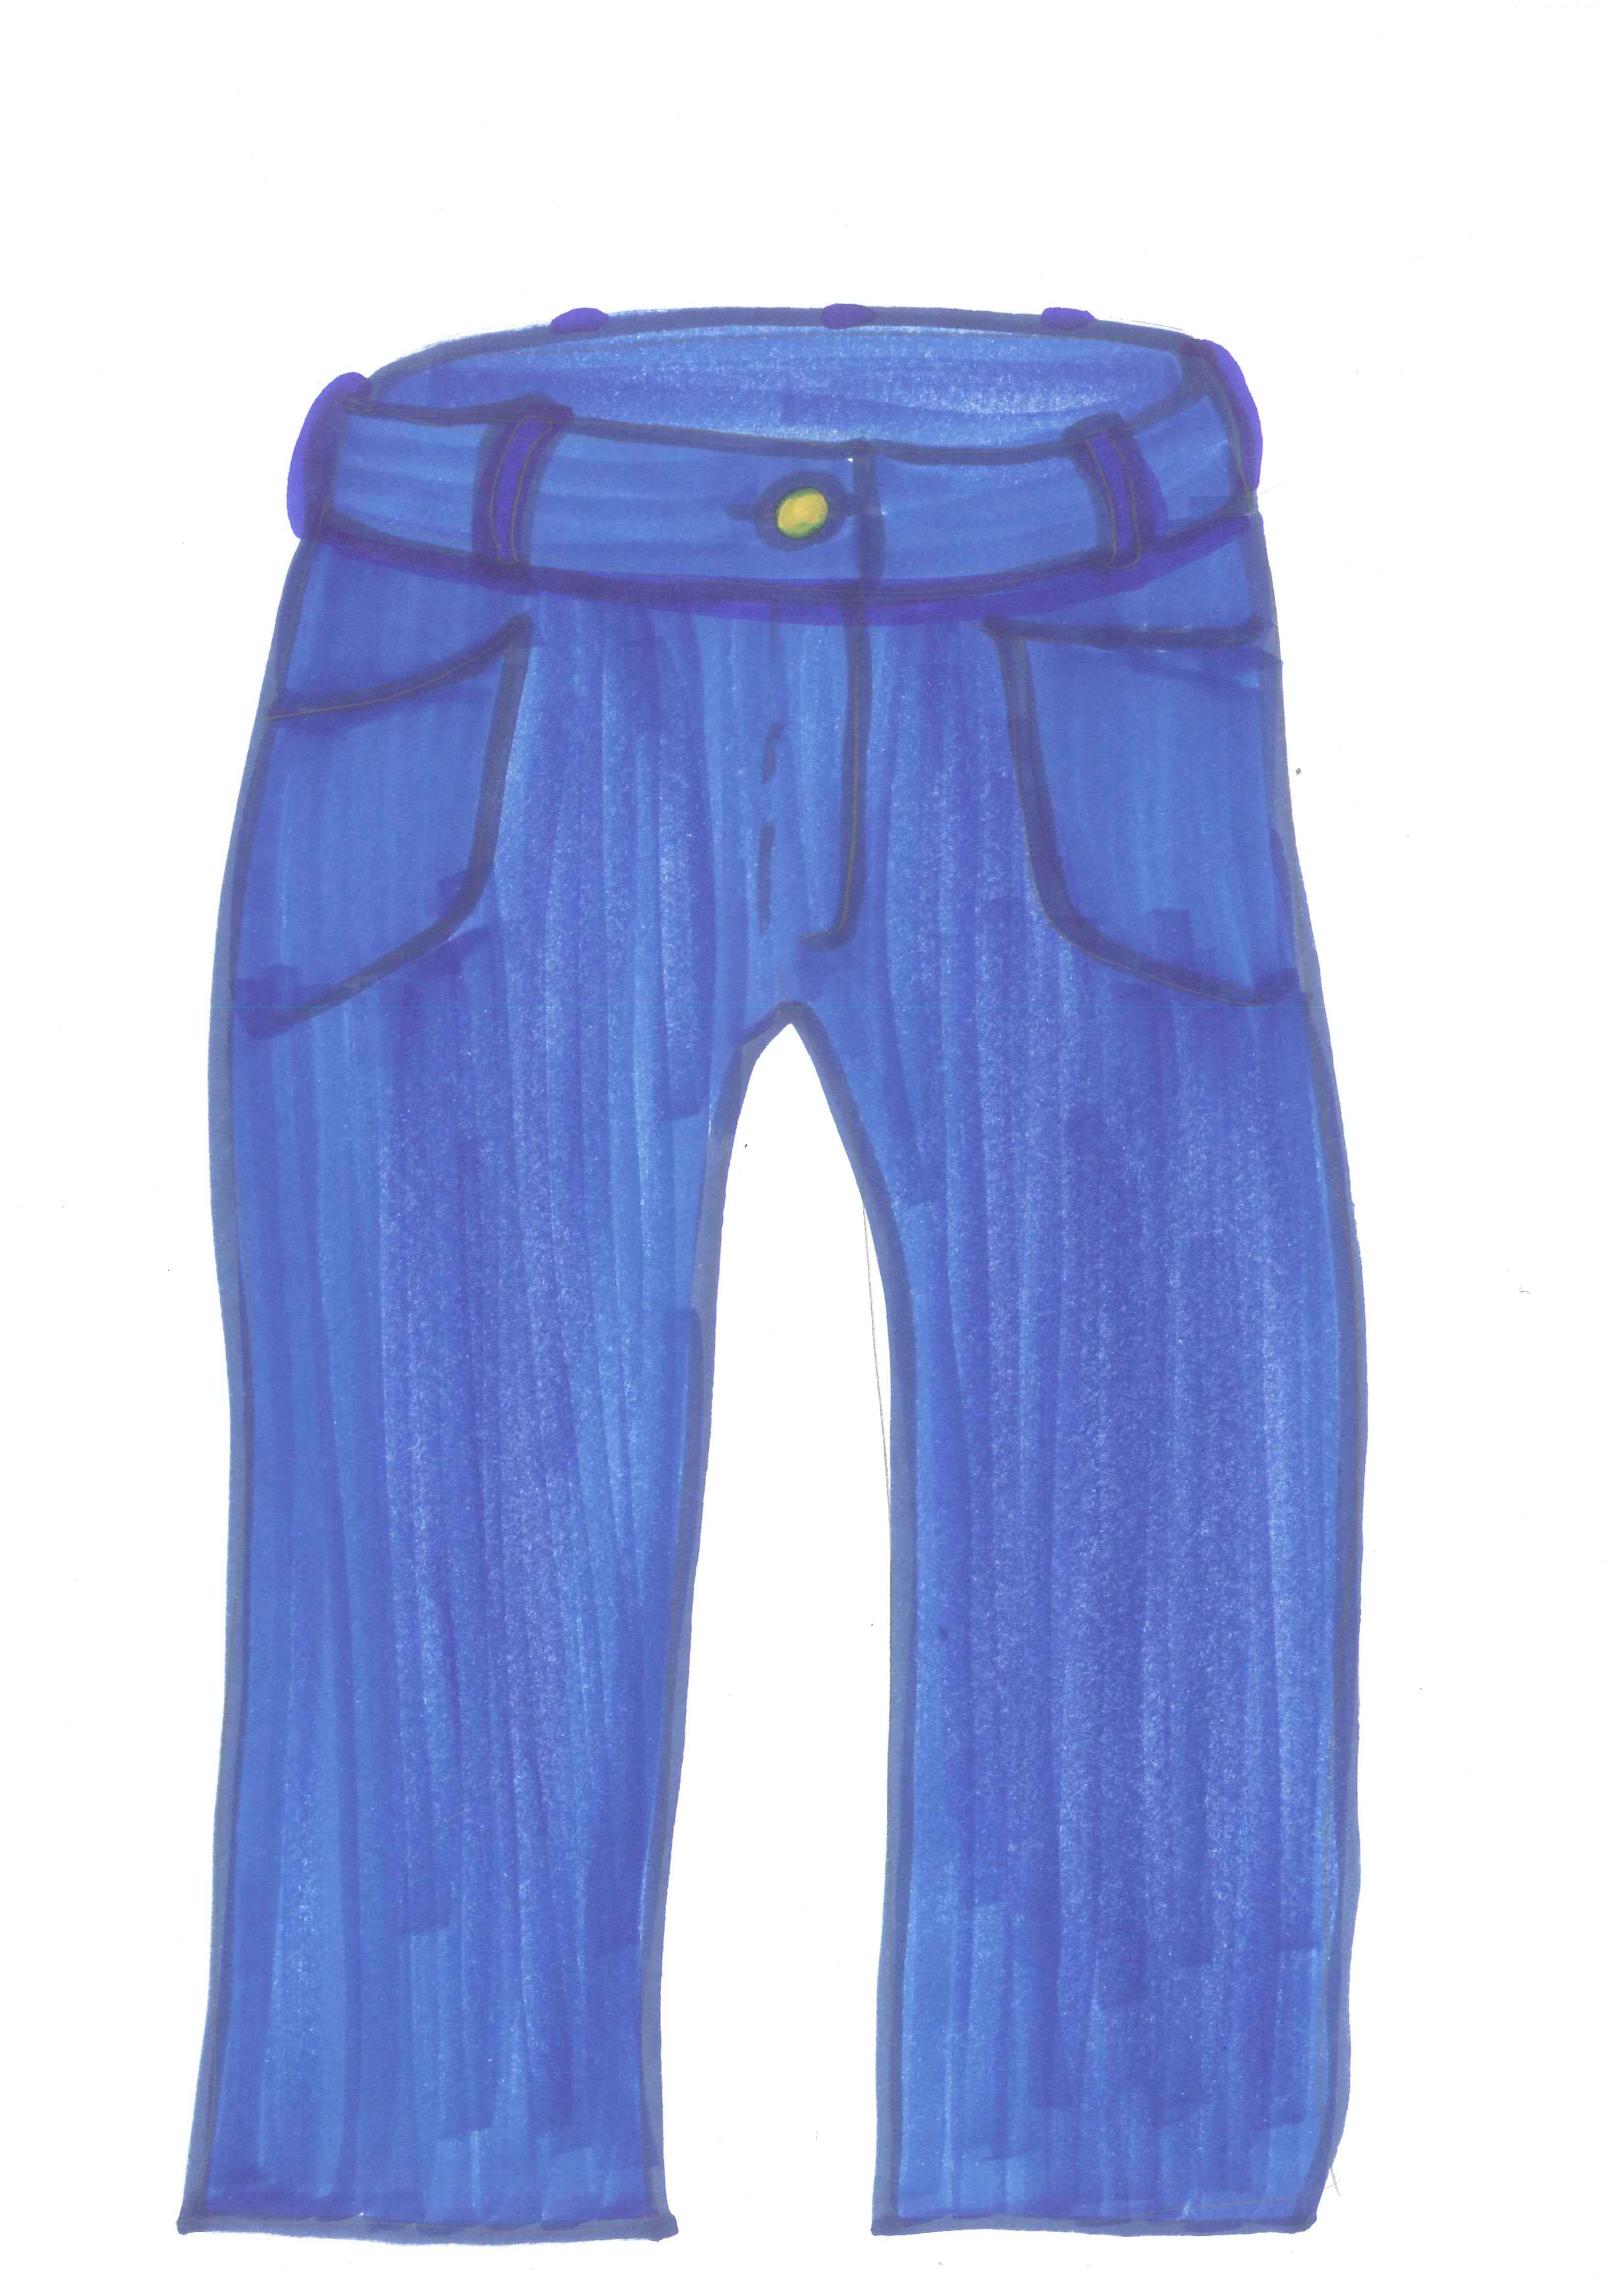 free clipart of jeans - photo #17